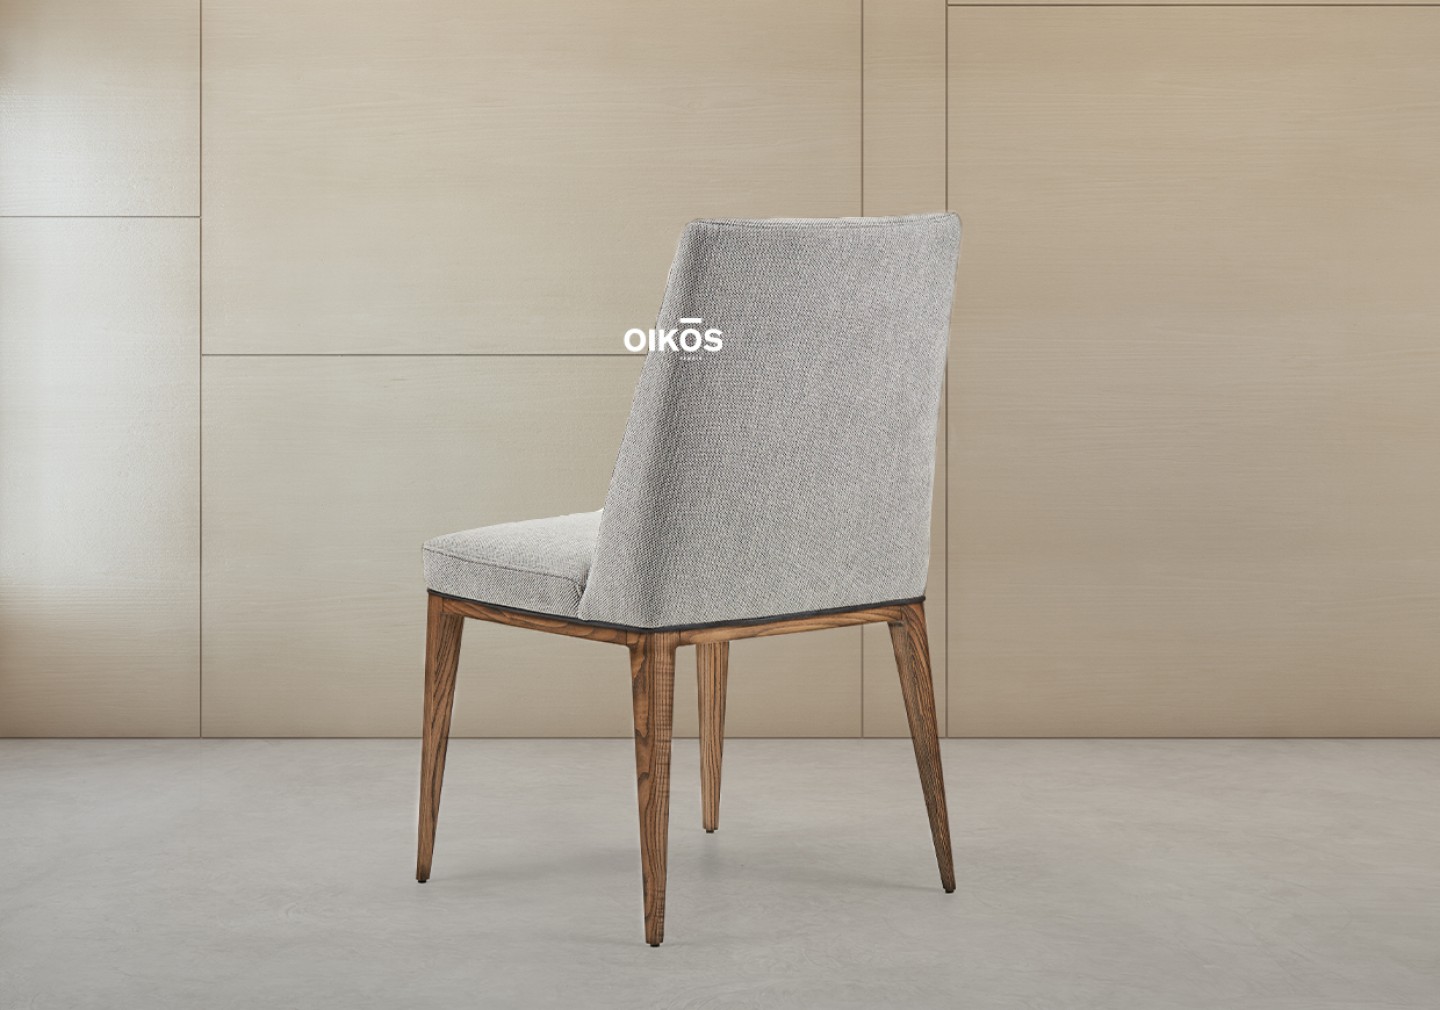 THE CELINE DINING CHAIR